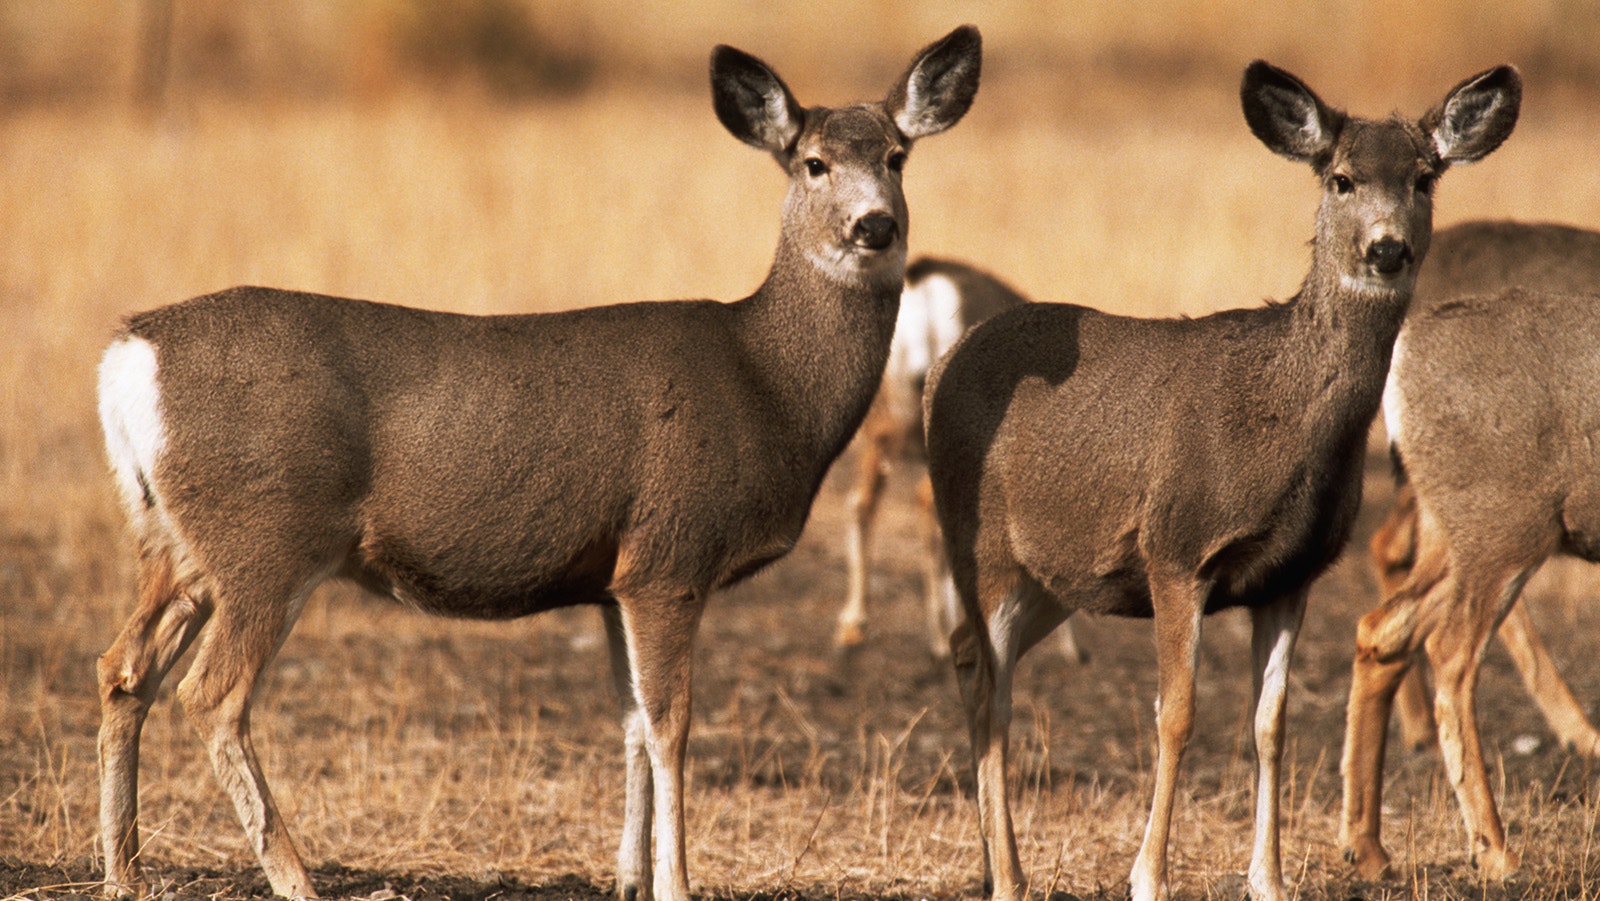 For the first time, chronic wasting disease has been confirmed in wildlife in Yellowstone National Park. The infected animal was a mule deer, like in this file photo of Yellowstone deer.